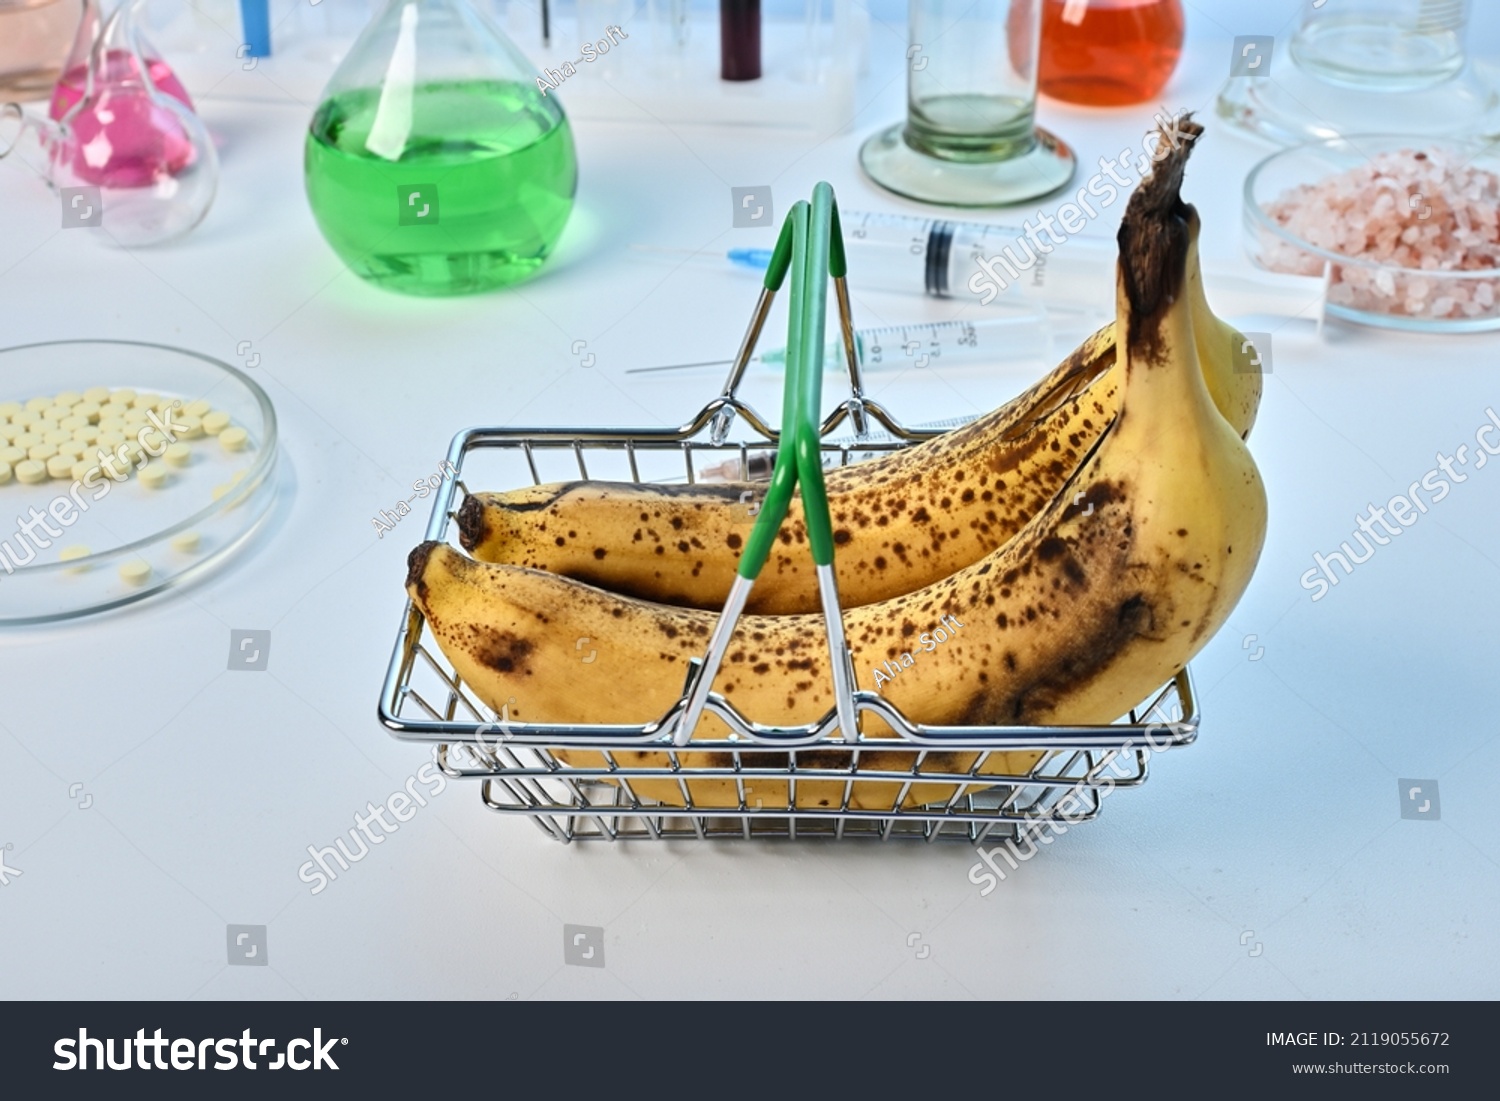 Bananas in metal basket - labs photo. Two yellow ripe bananas in metallic toy basket. Food control laboratory of fruit safety. Chemical expertize of exotic fruits for GMO nutriments. Diet analysis. #2119055672